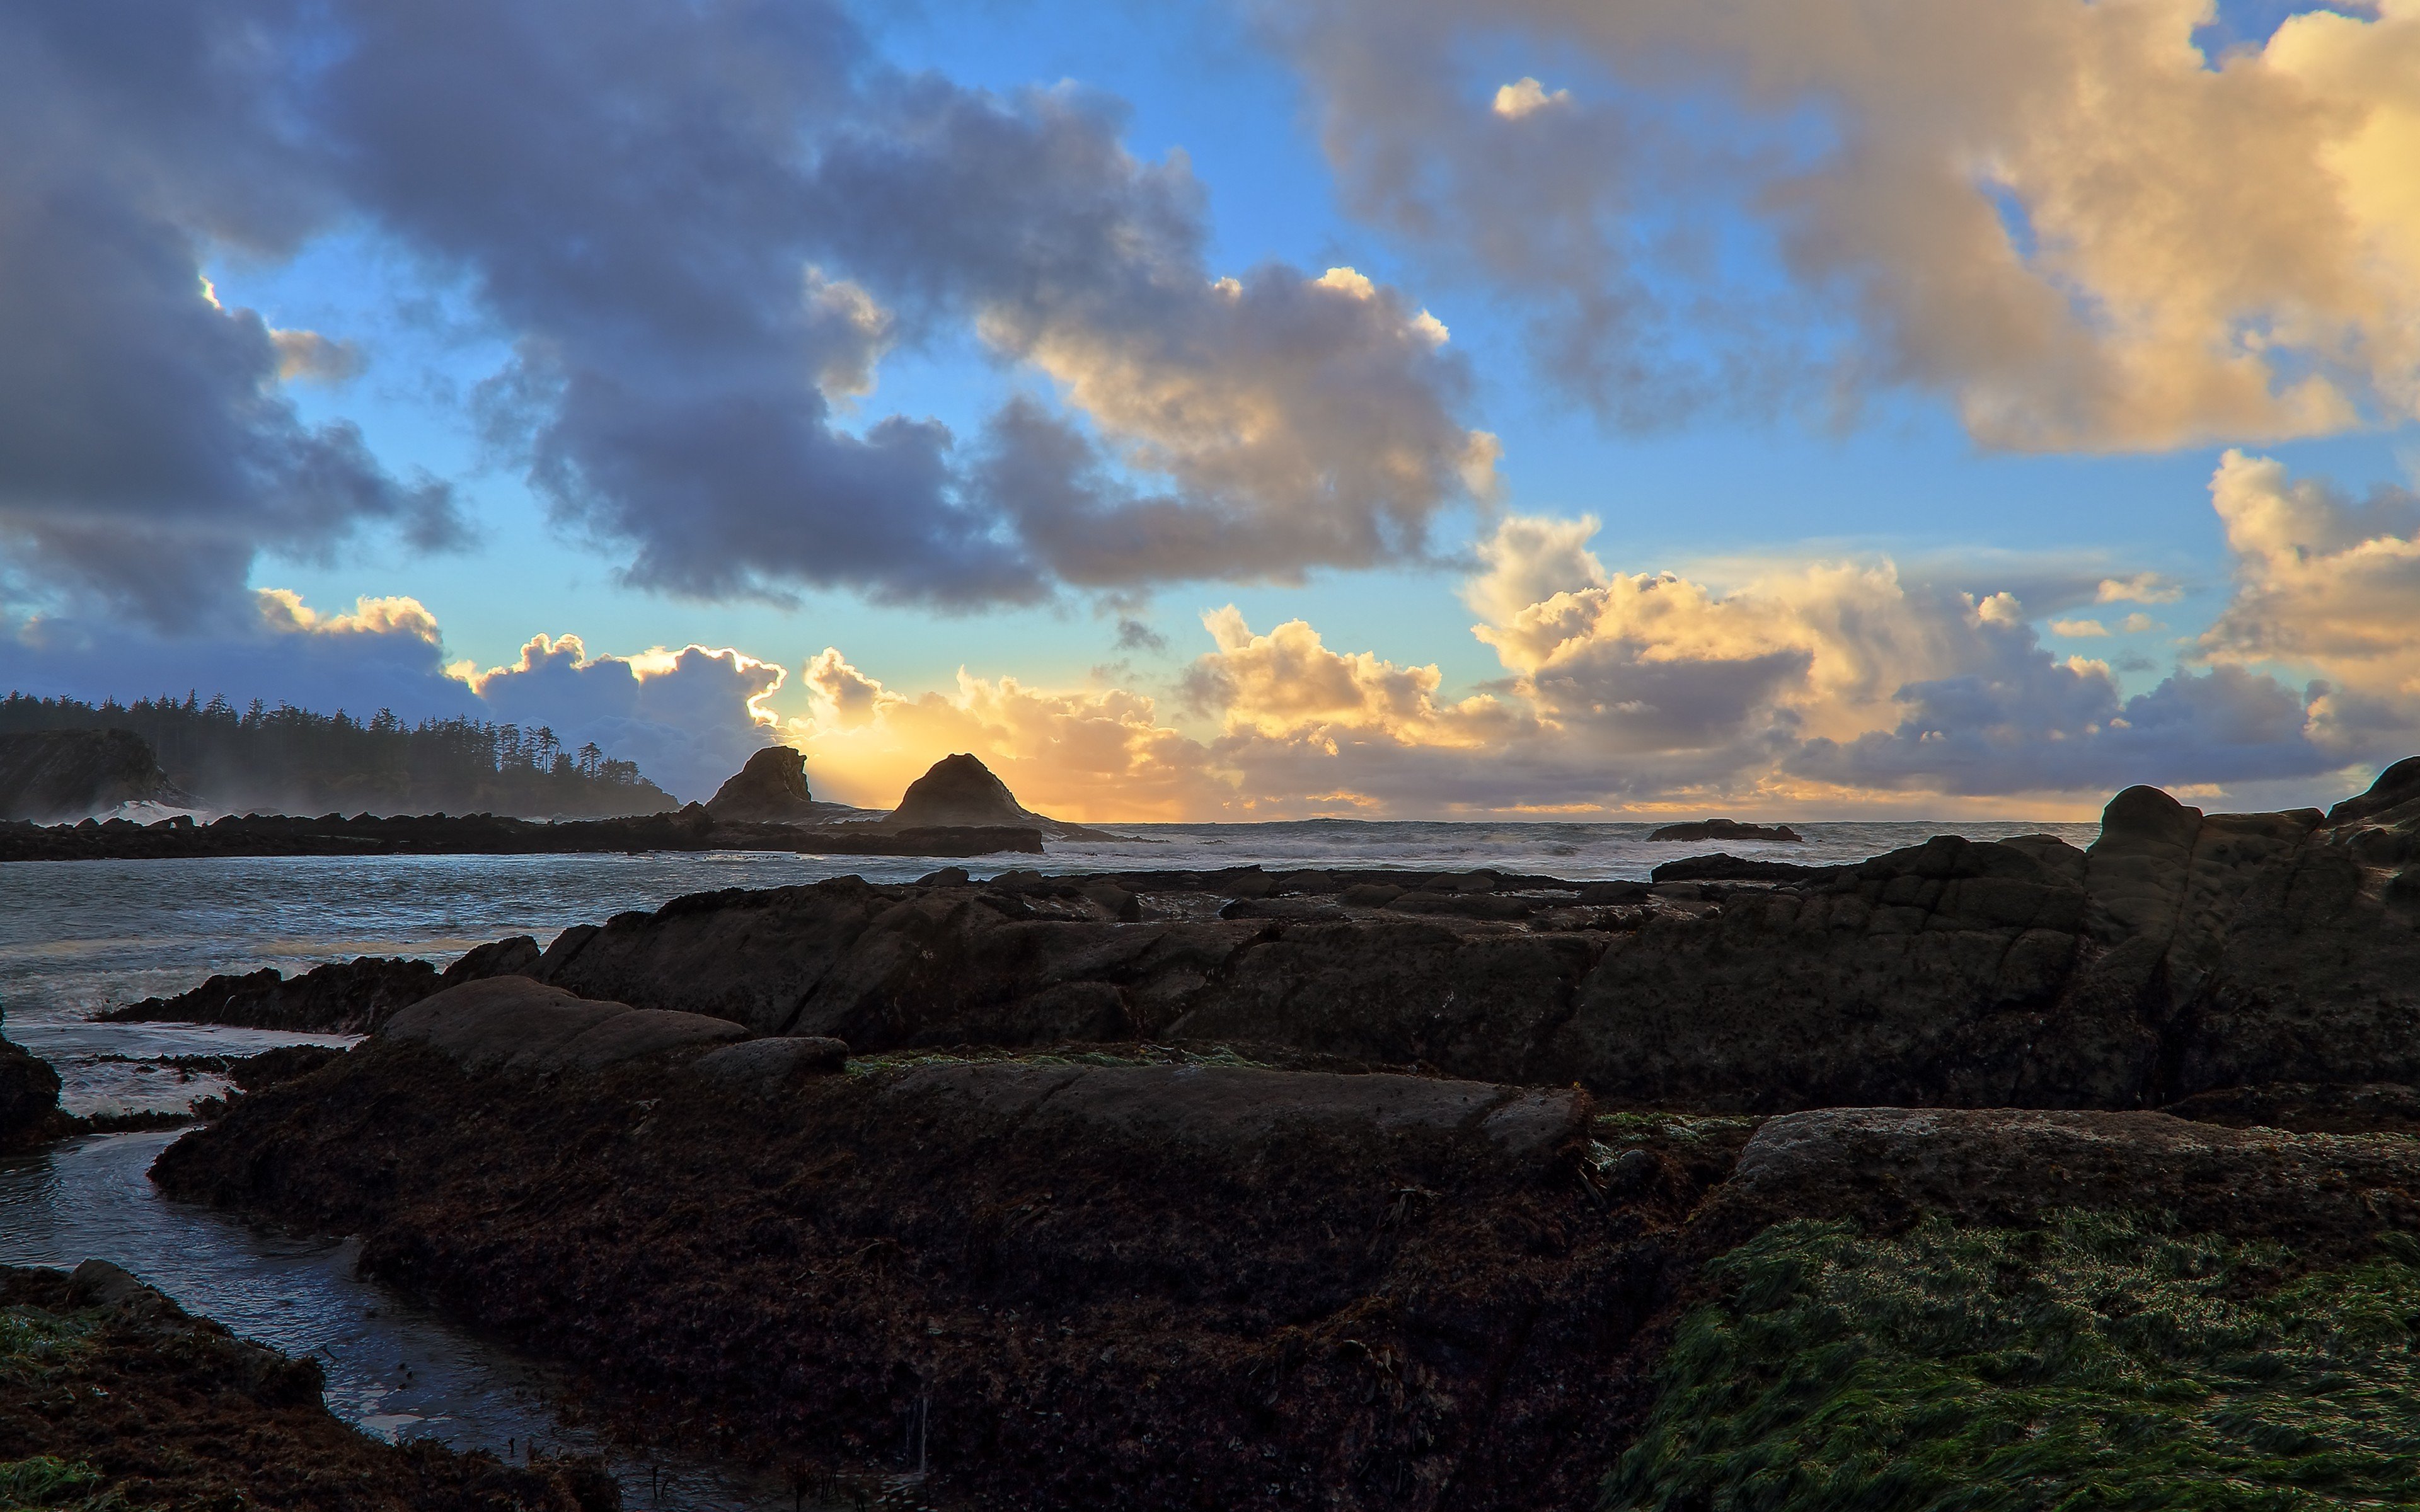 sunset, Clouds, Landscapes, Nature, Coast, Waves, Rocks, Hdr, Photography, Evening, Sea Wallpaper